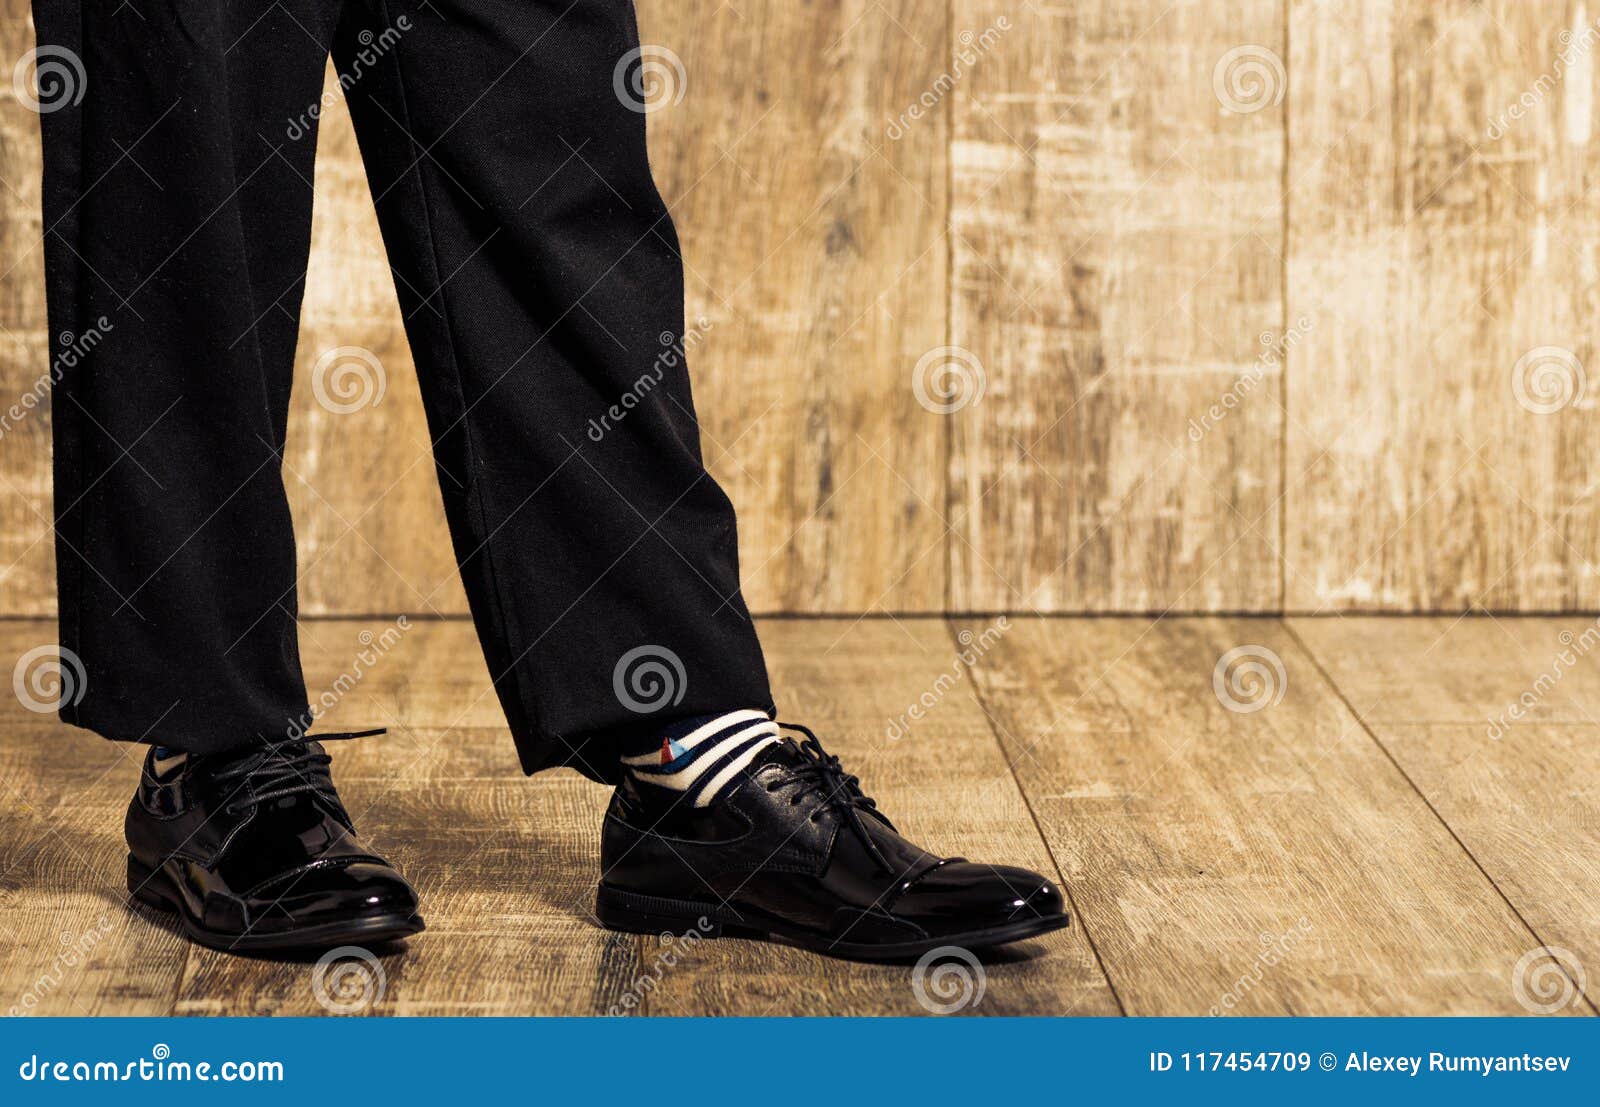 Boy in Black Pants and Shoes Stock Image - Image of standing, black ...